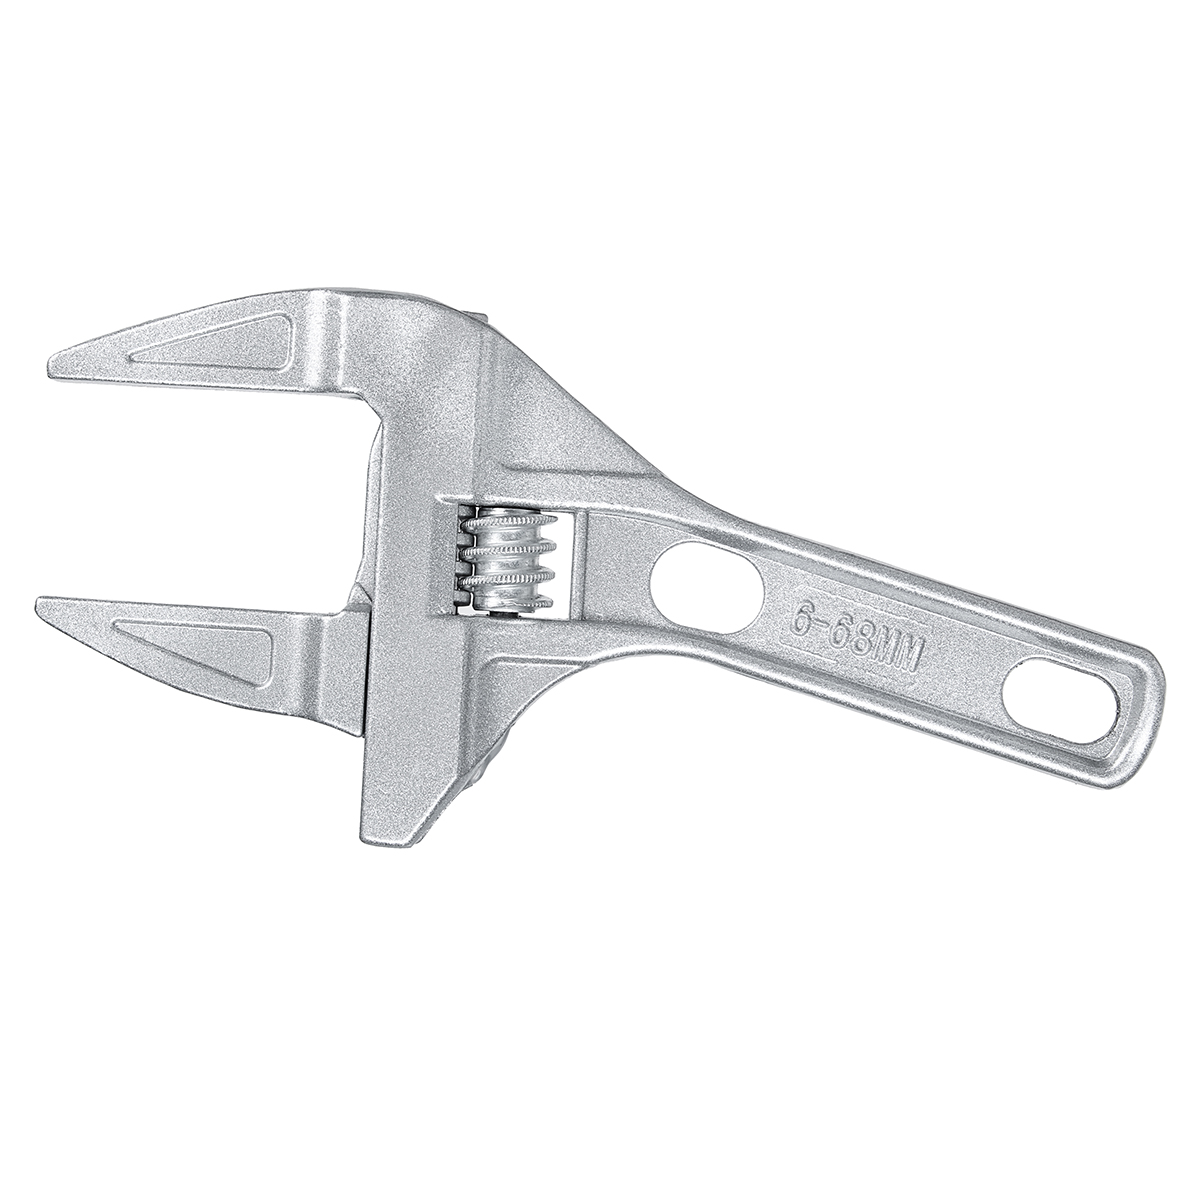 Adjustable-Spanner-16-68mm-Big-Opening-Spanner-Wrench-Mini-Nut-Key-Hand-Tools-Metal-Universal-Spanne-1625089-8